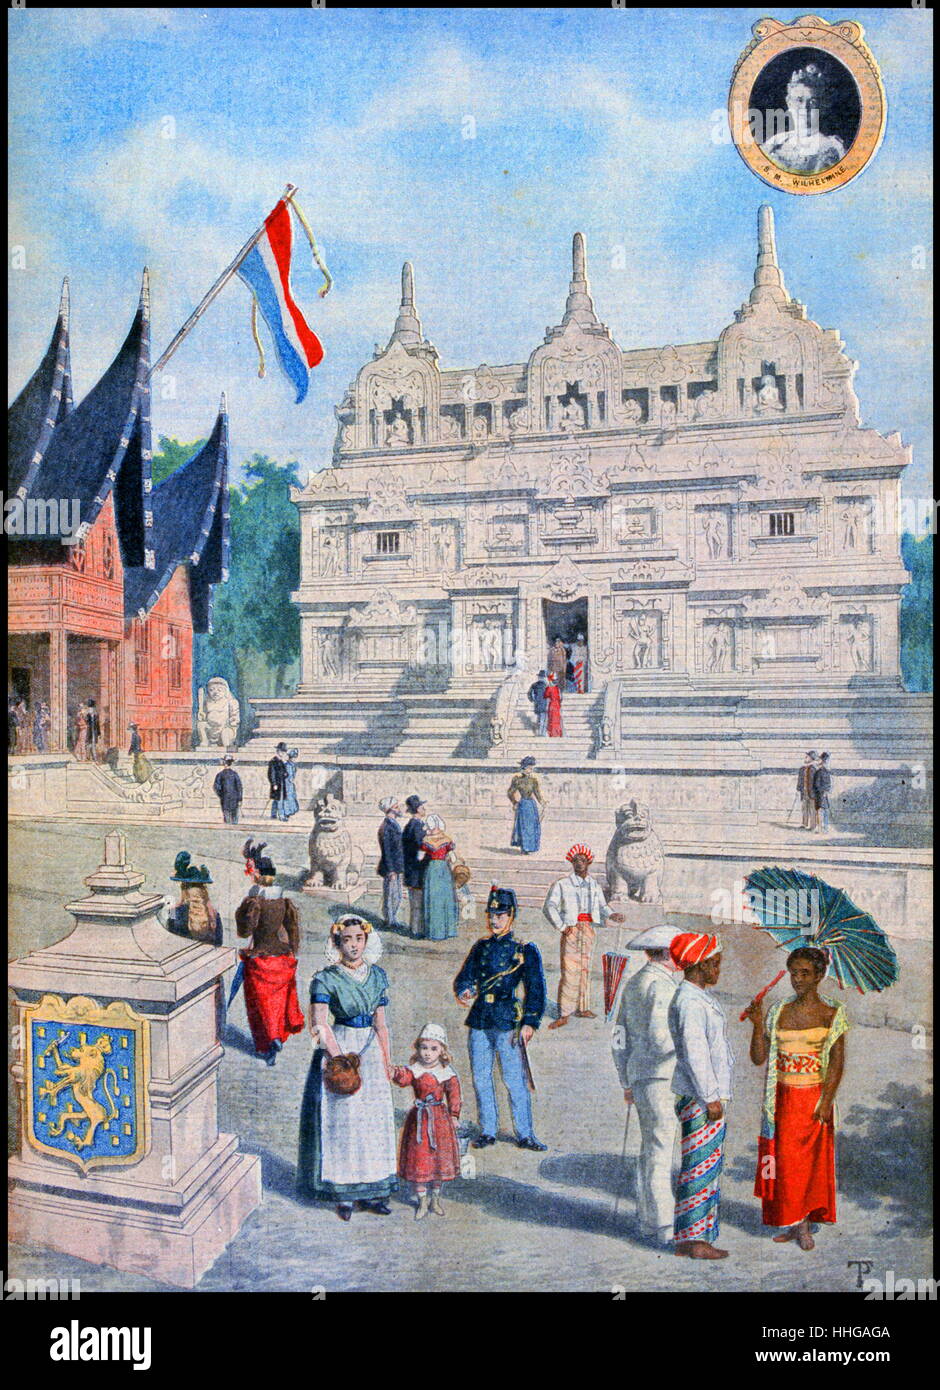 Illustration showing the Dutch East Indies (Indonesia), Pavilion, at the Exposition Universelle of 1900. A portrait of Queen Wilhelmina is inset. This was a fair held in Paris, France, from 14 April to 12 November 1900, to celebrate the achievements of the past century and to accelerate development into the next. Stock Photo